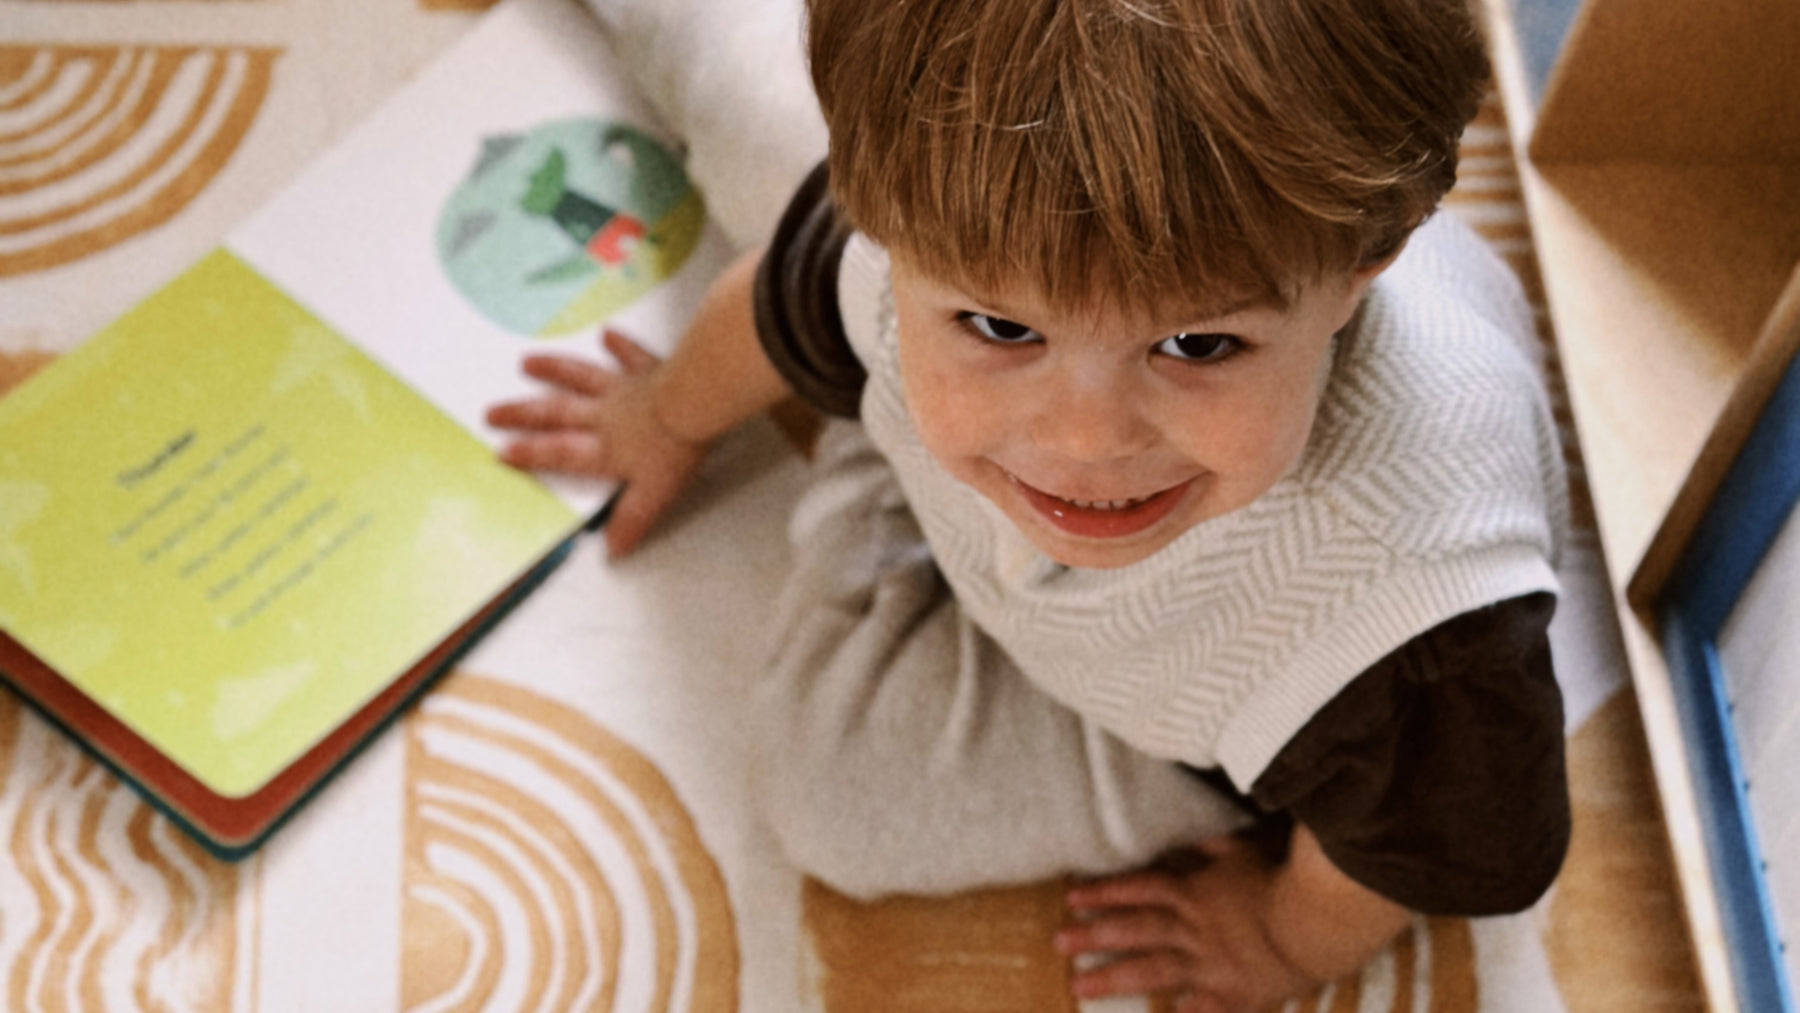 Close up of a boy looking up and smiling. Kids, educational strategies, fun activities.